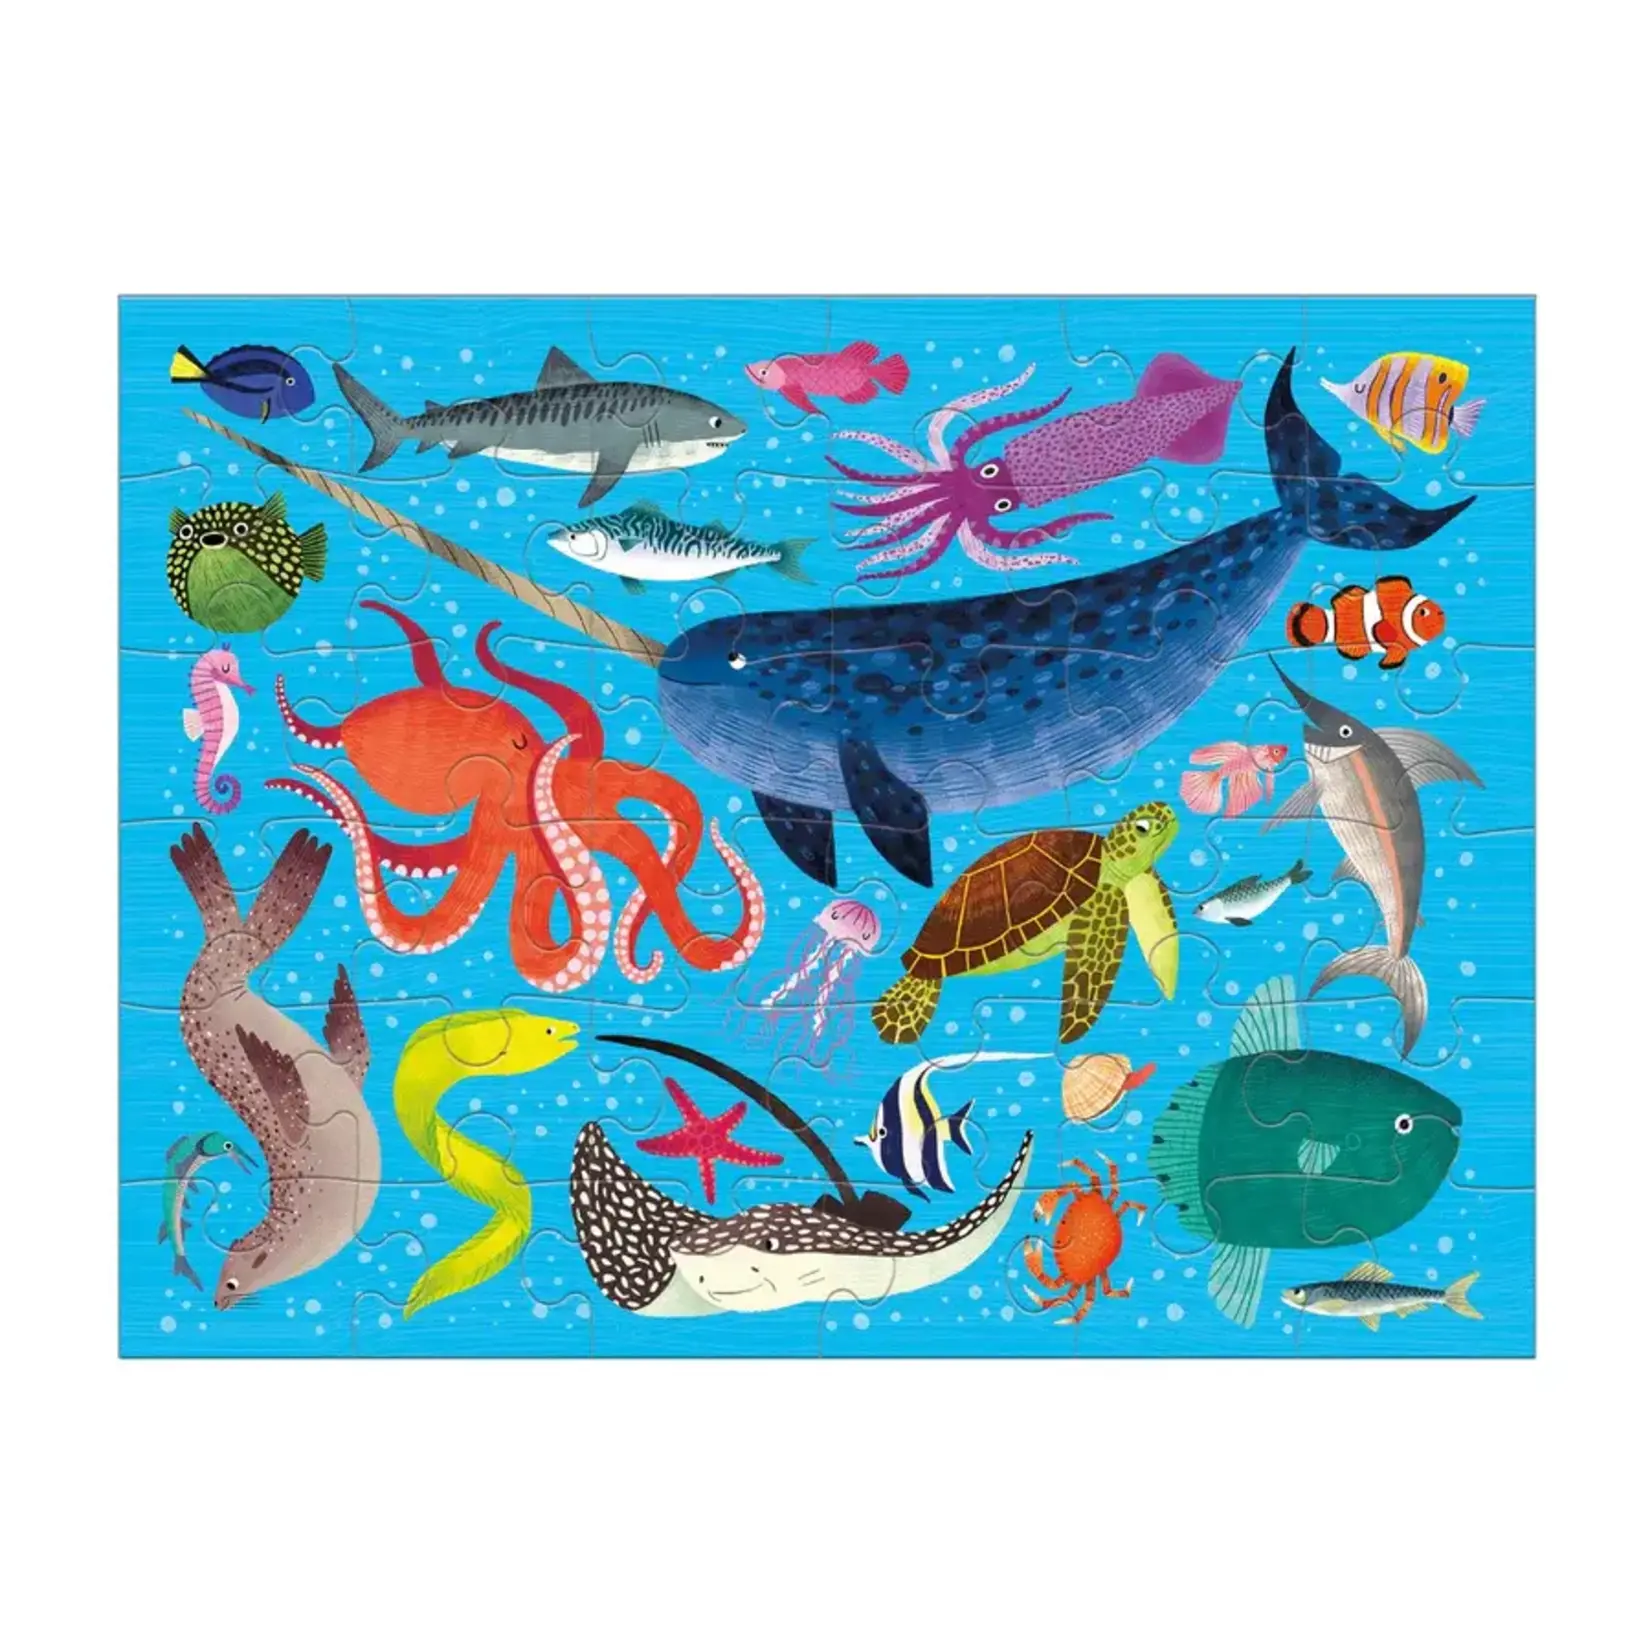 Mudpuppy Ocean Life Puzzle To Go, 36-Piece Jigsaw Puzzle